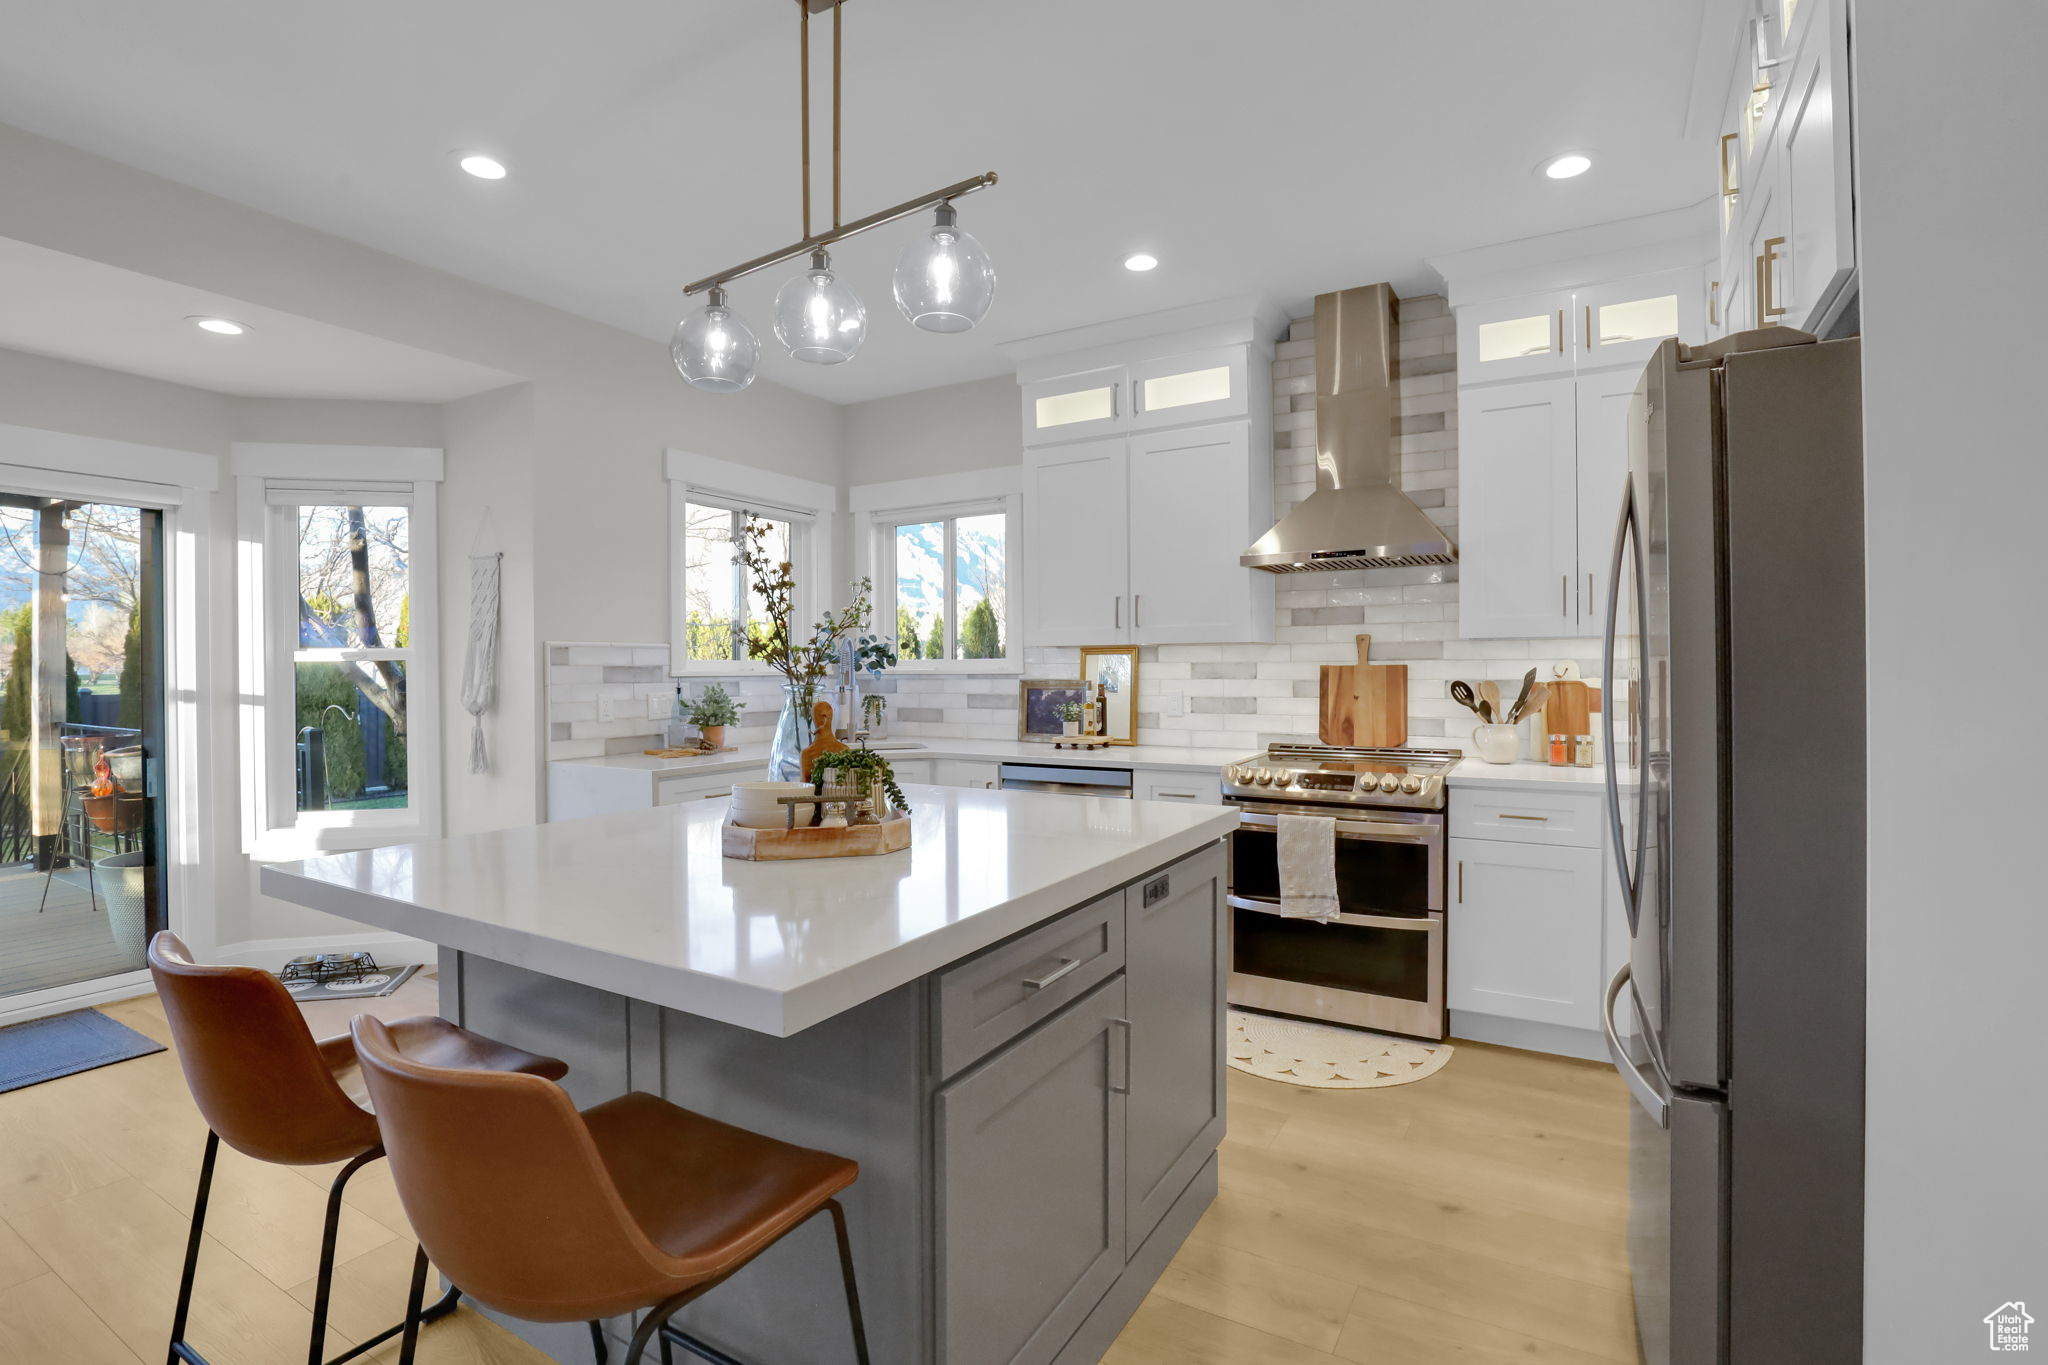 Kitchen featuring light wood-type flooring, stainless steel appliances, a breakfast bar area, wall chimney exhaust hood, and a kitchen island